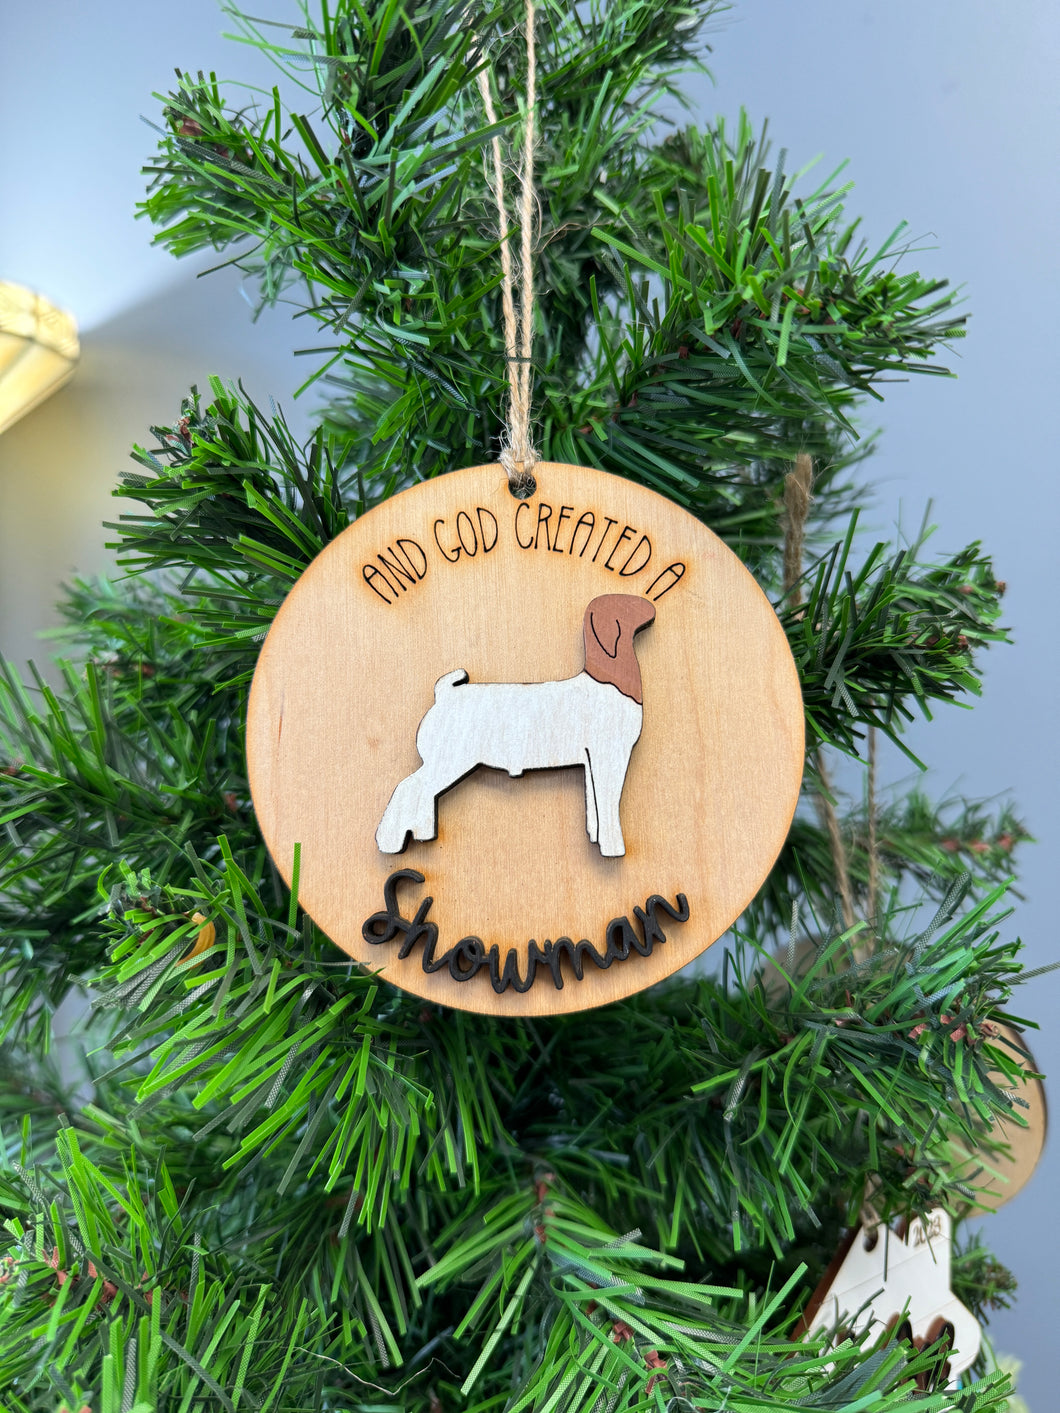 And God created a showman (goat) ornament